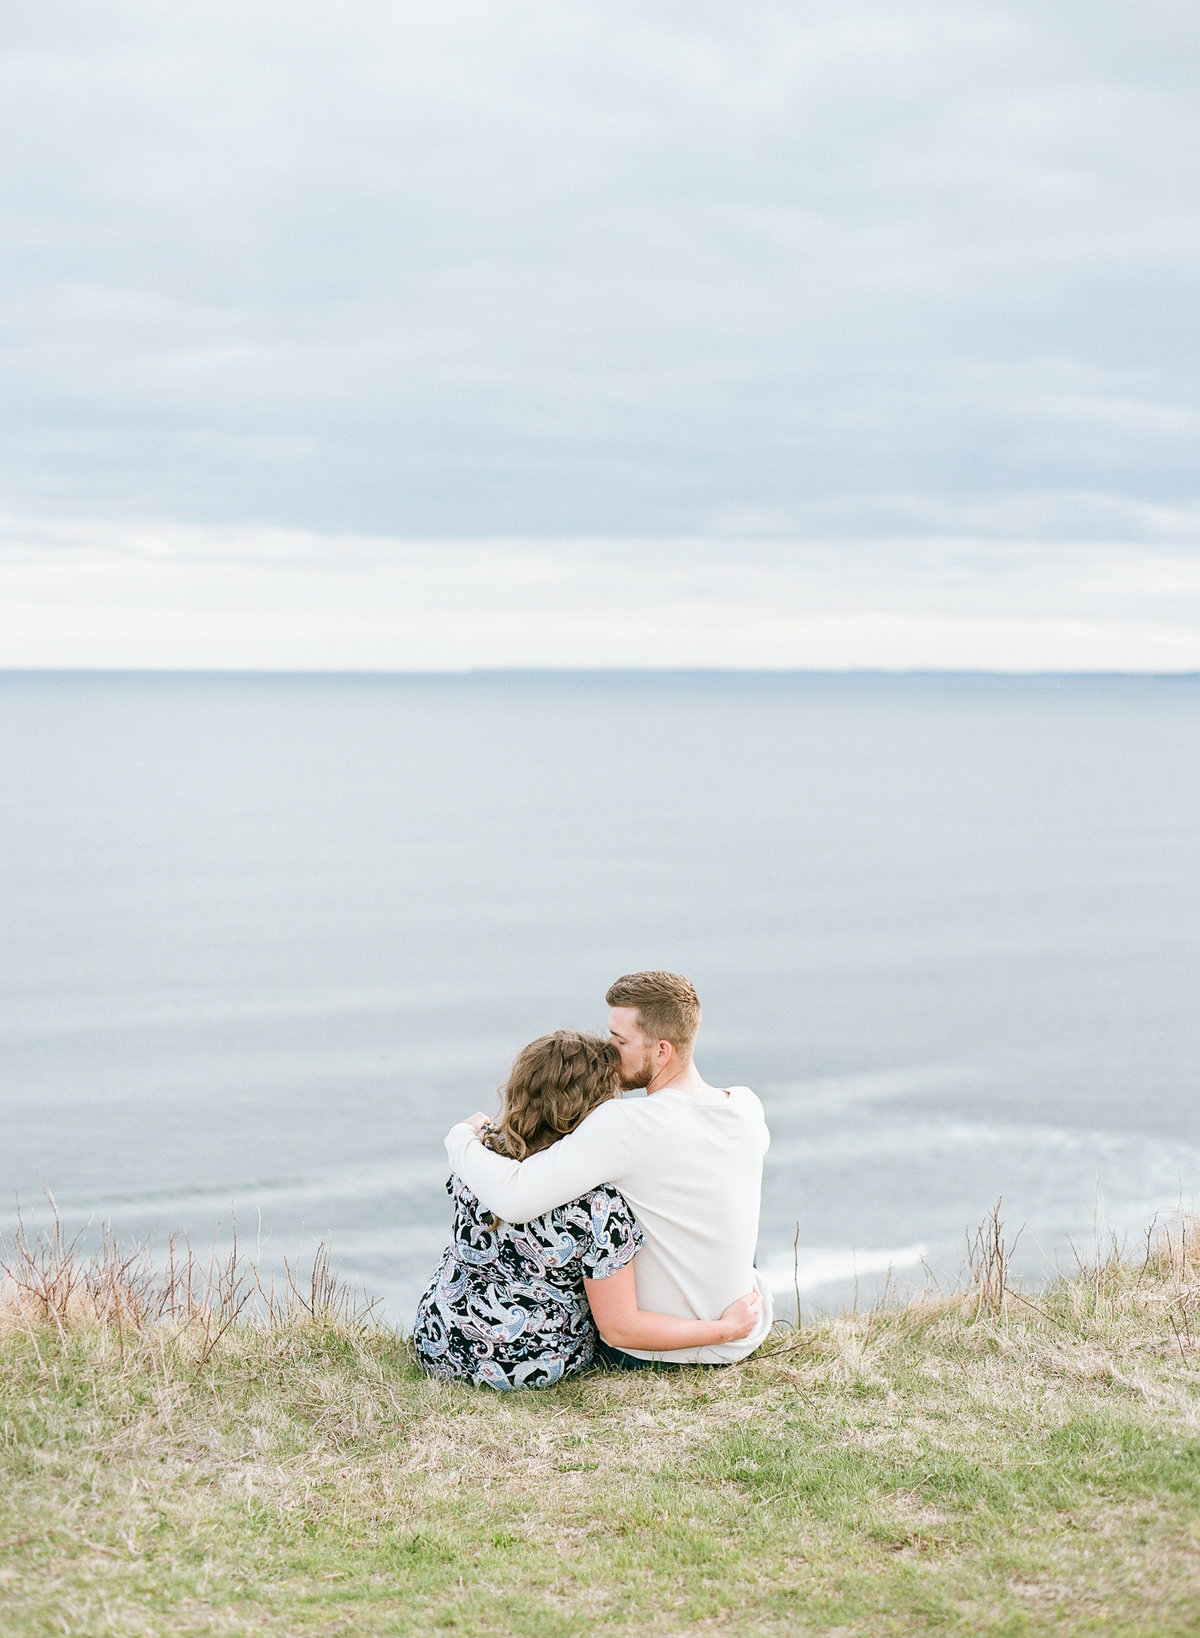 Jacqueline Anne Photography - Akayla and Andrew - Lawrencetown Beach-62